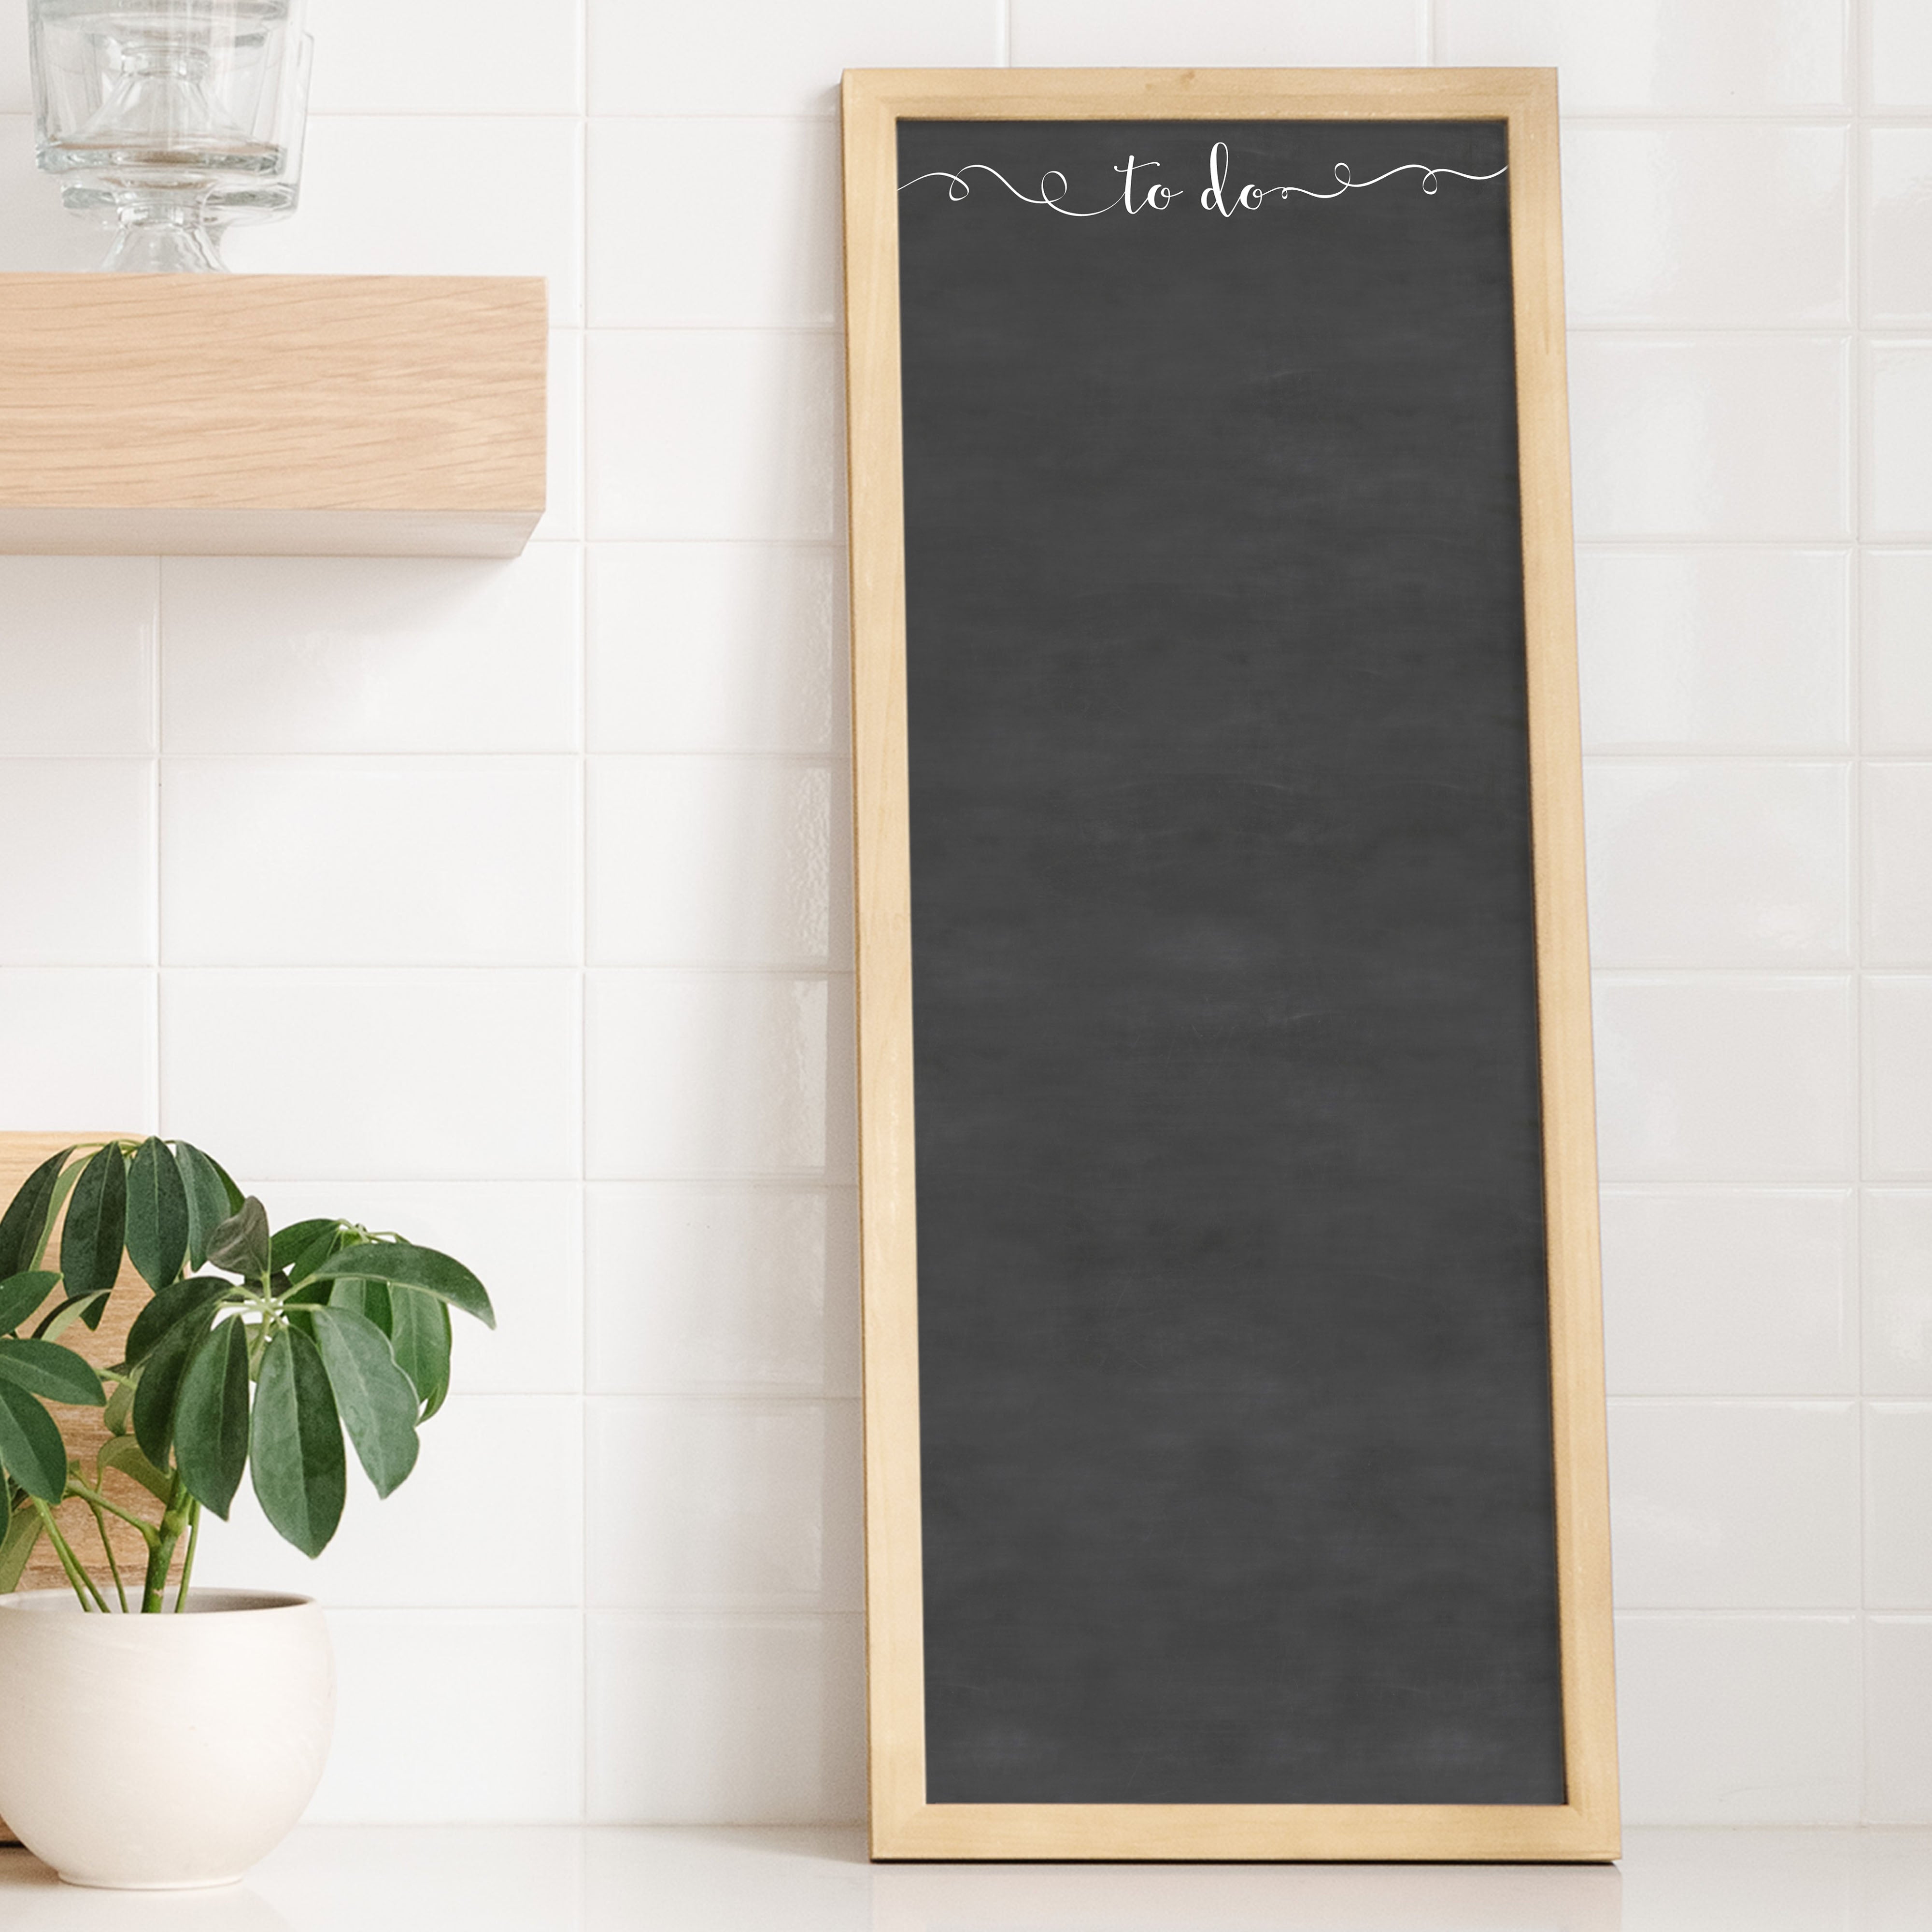 A framed dry-erase chalkboard calendar with a two month design format hanging on the wall